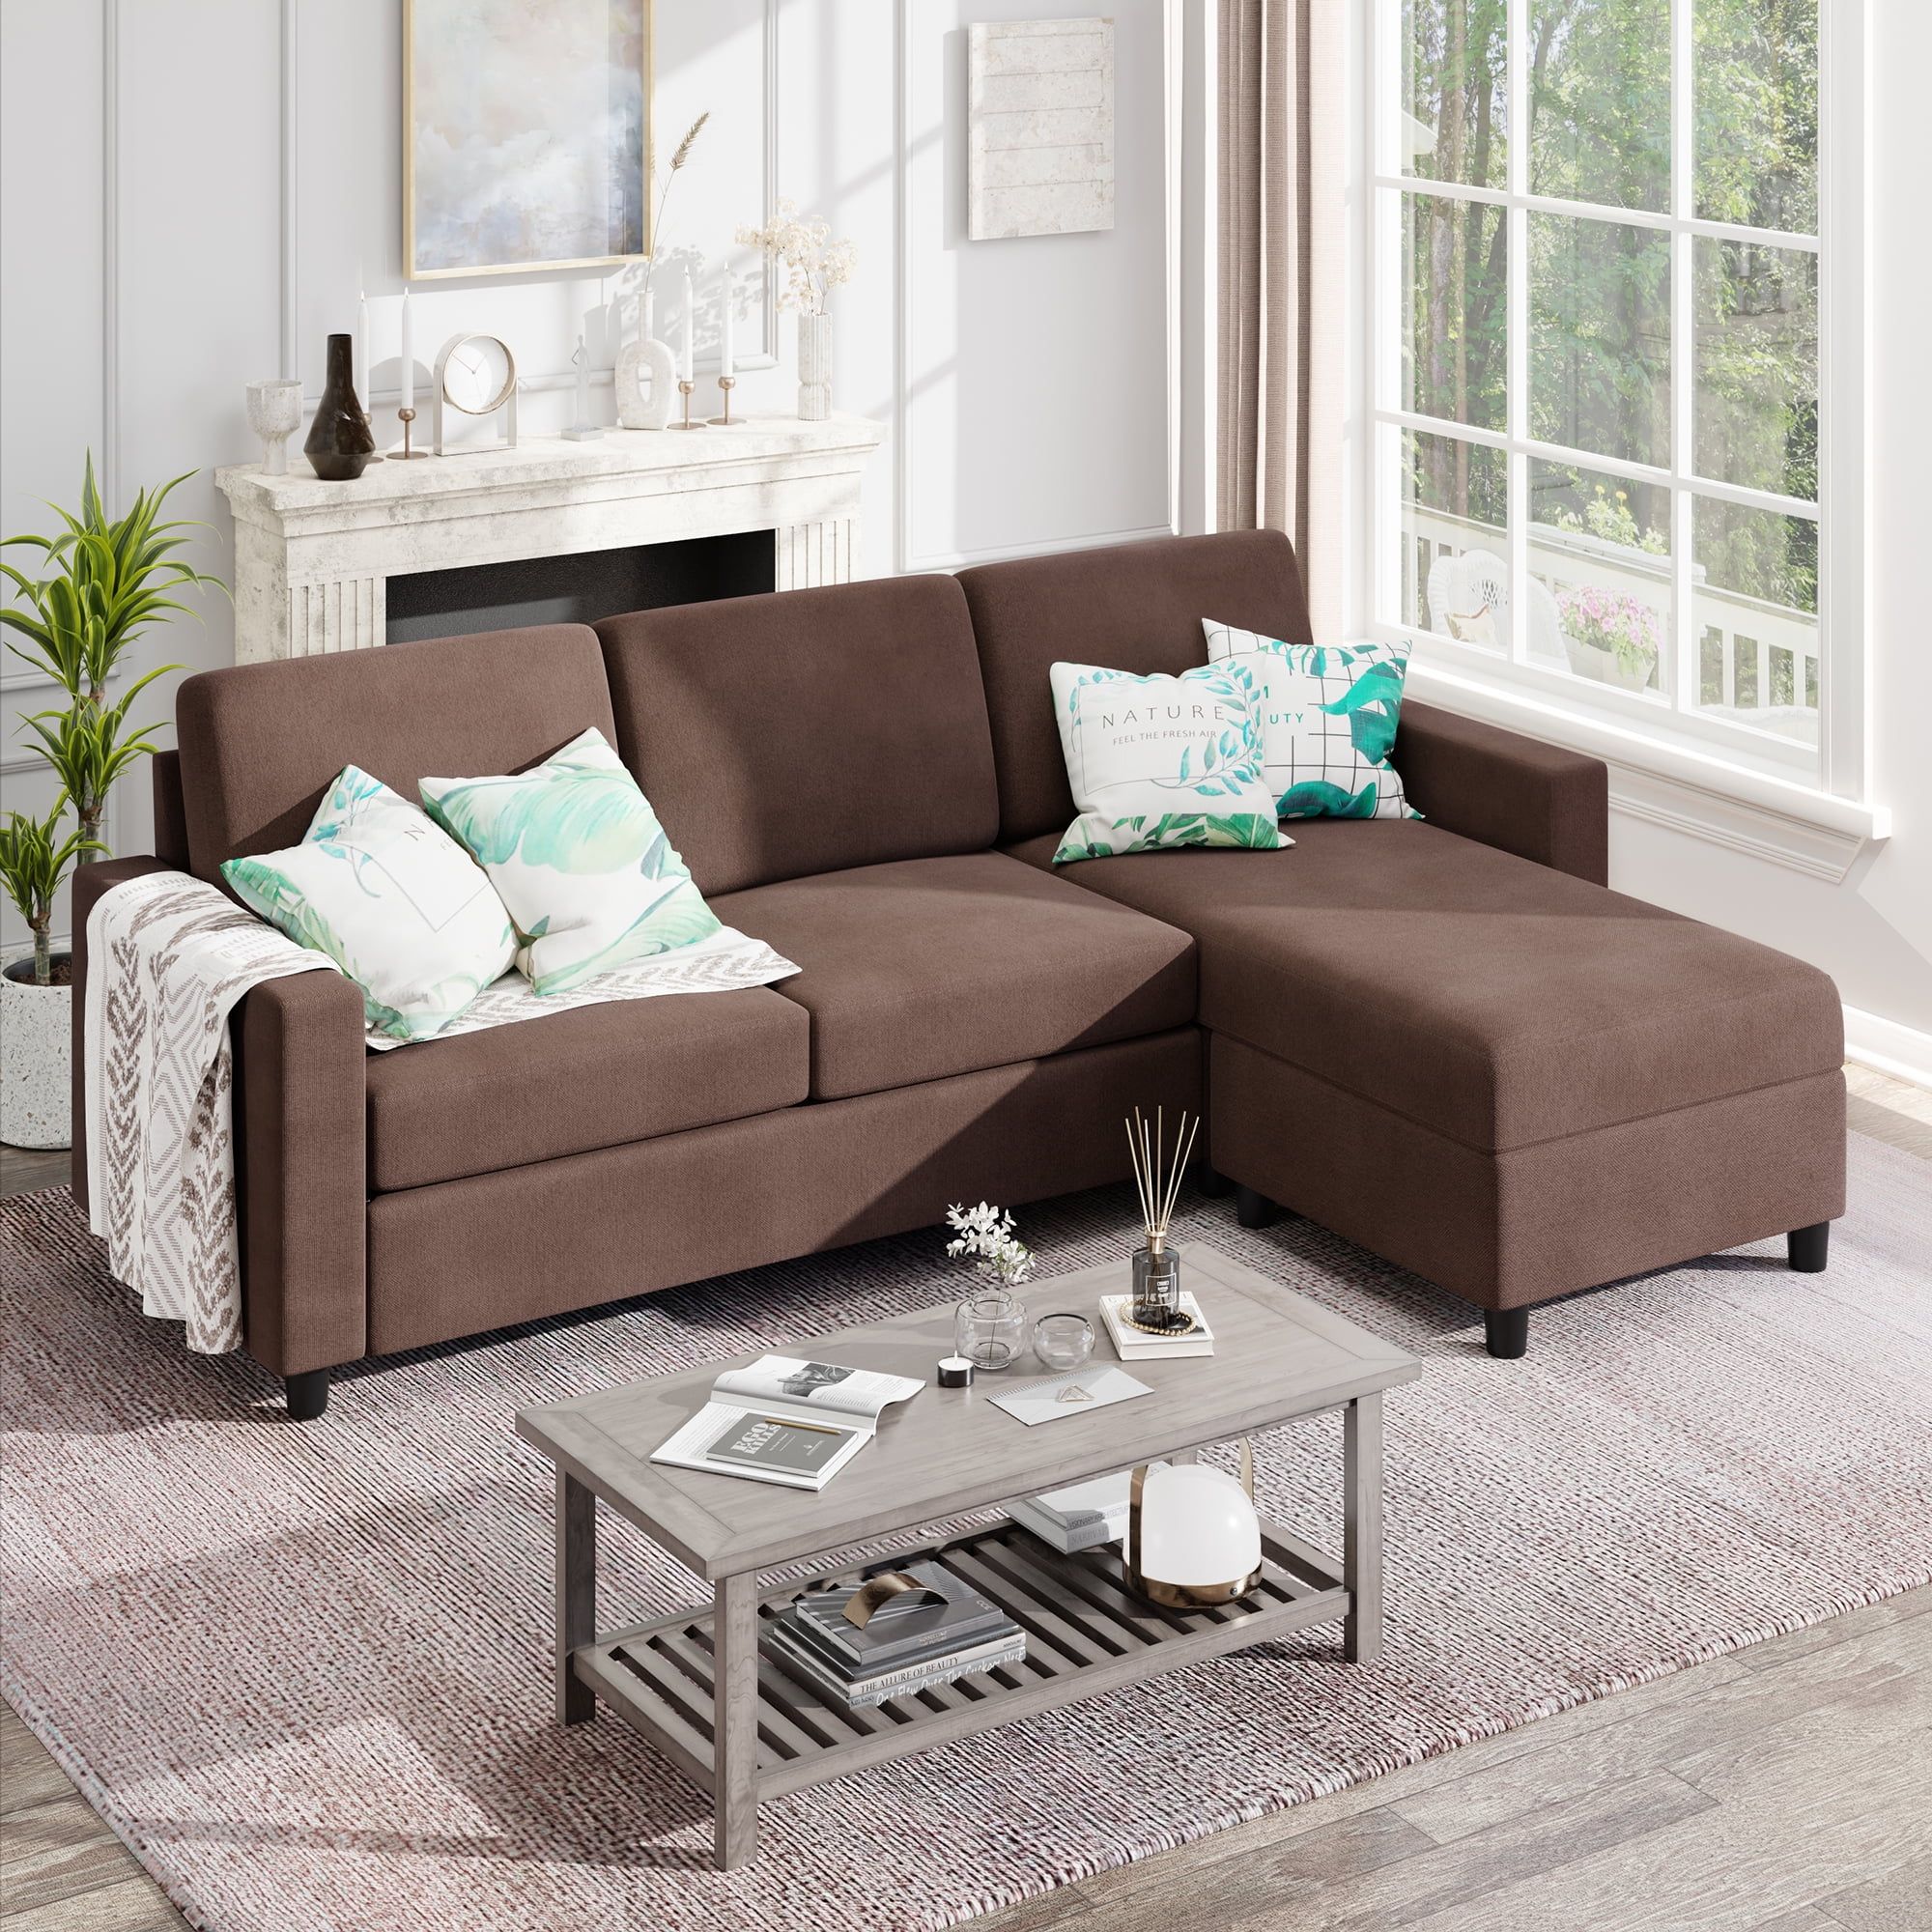 Sobaniilo Convertible Sectional Sofa Couch, Modern Linen Fabric L Shaped  3 Seat Sofa Sectional With Reversible Chaise For Small Space (light Gray) –  Walmart With Regard To Small L Shaped Sectional Sofas In Beige (Photo 7 of 15)